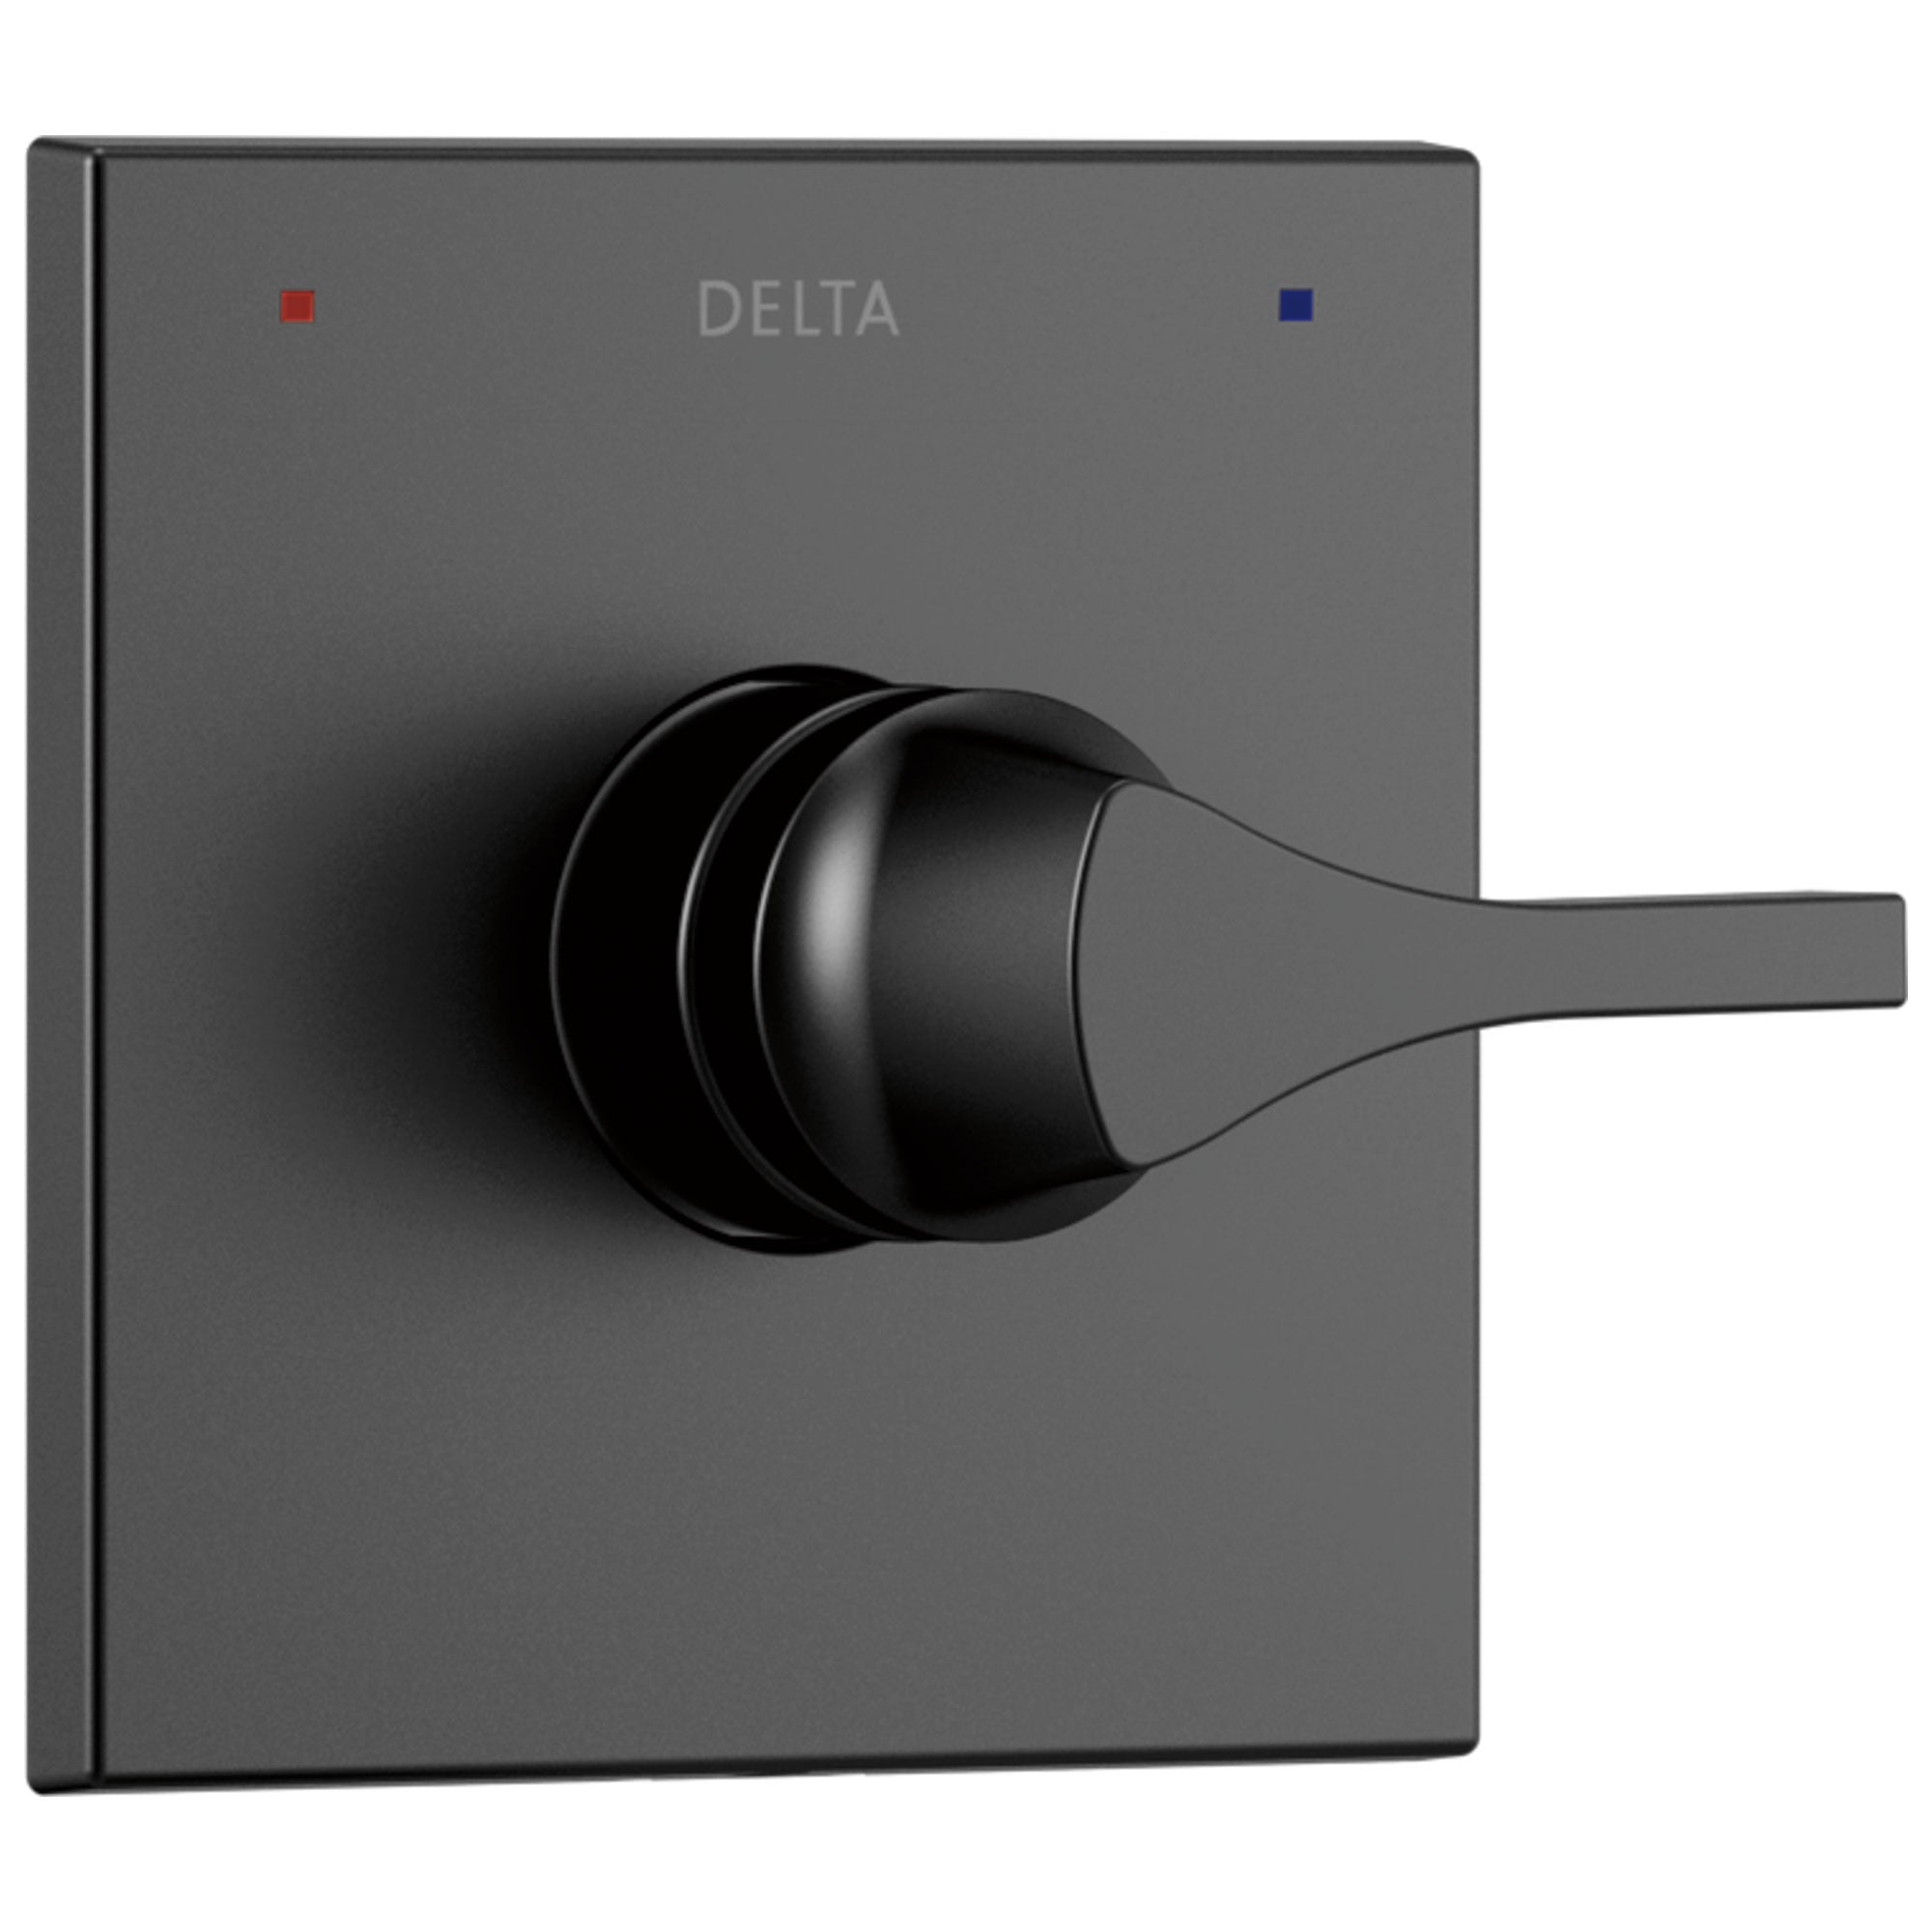 Delta Zura Matte Black Finish Monitor 14 Series Shower Faucet Control Only Includes Handle, Cartridge, and Valve with Stops D3645V